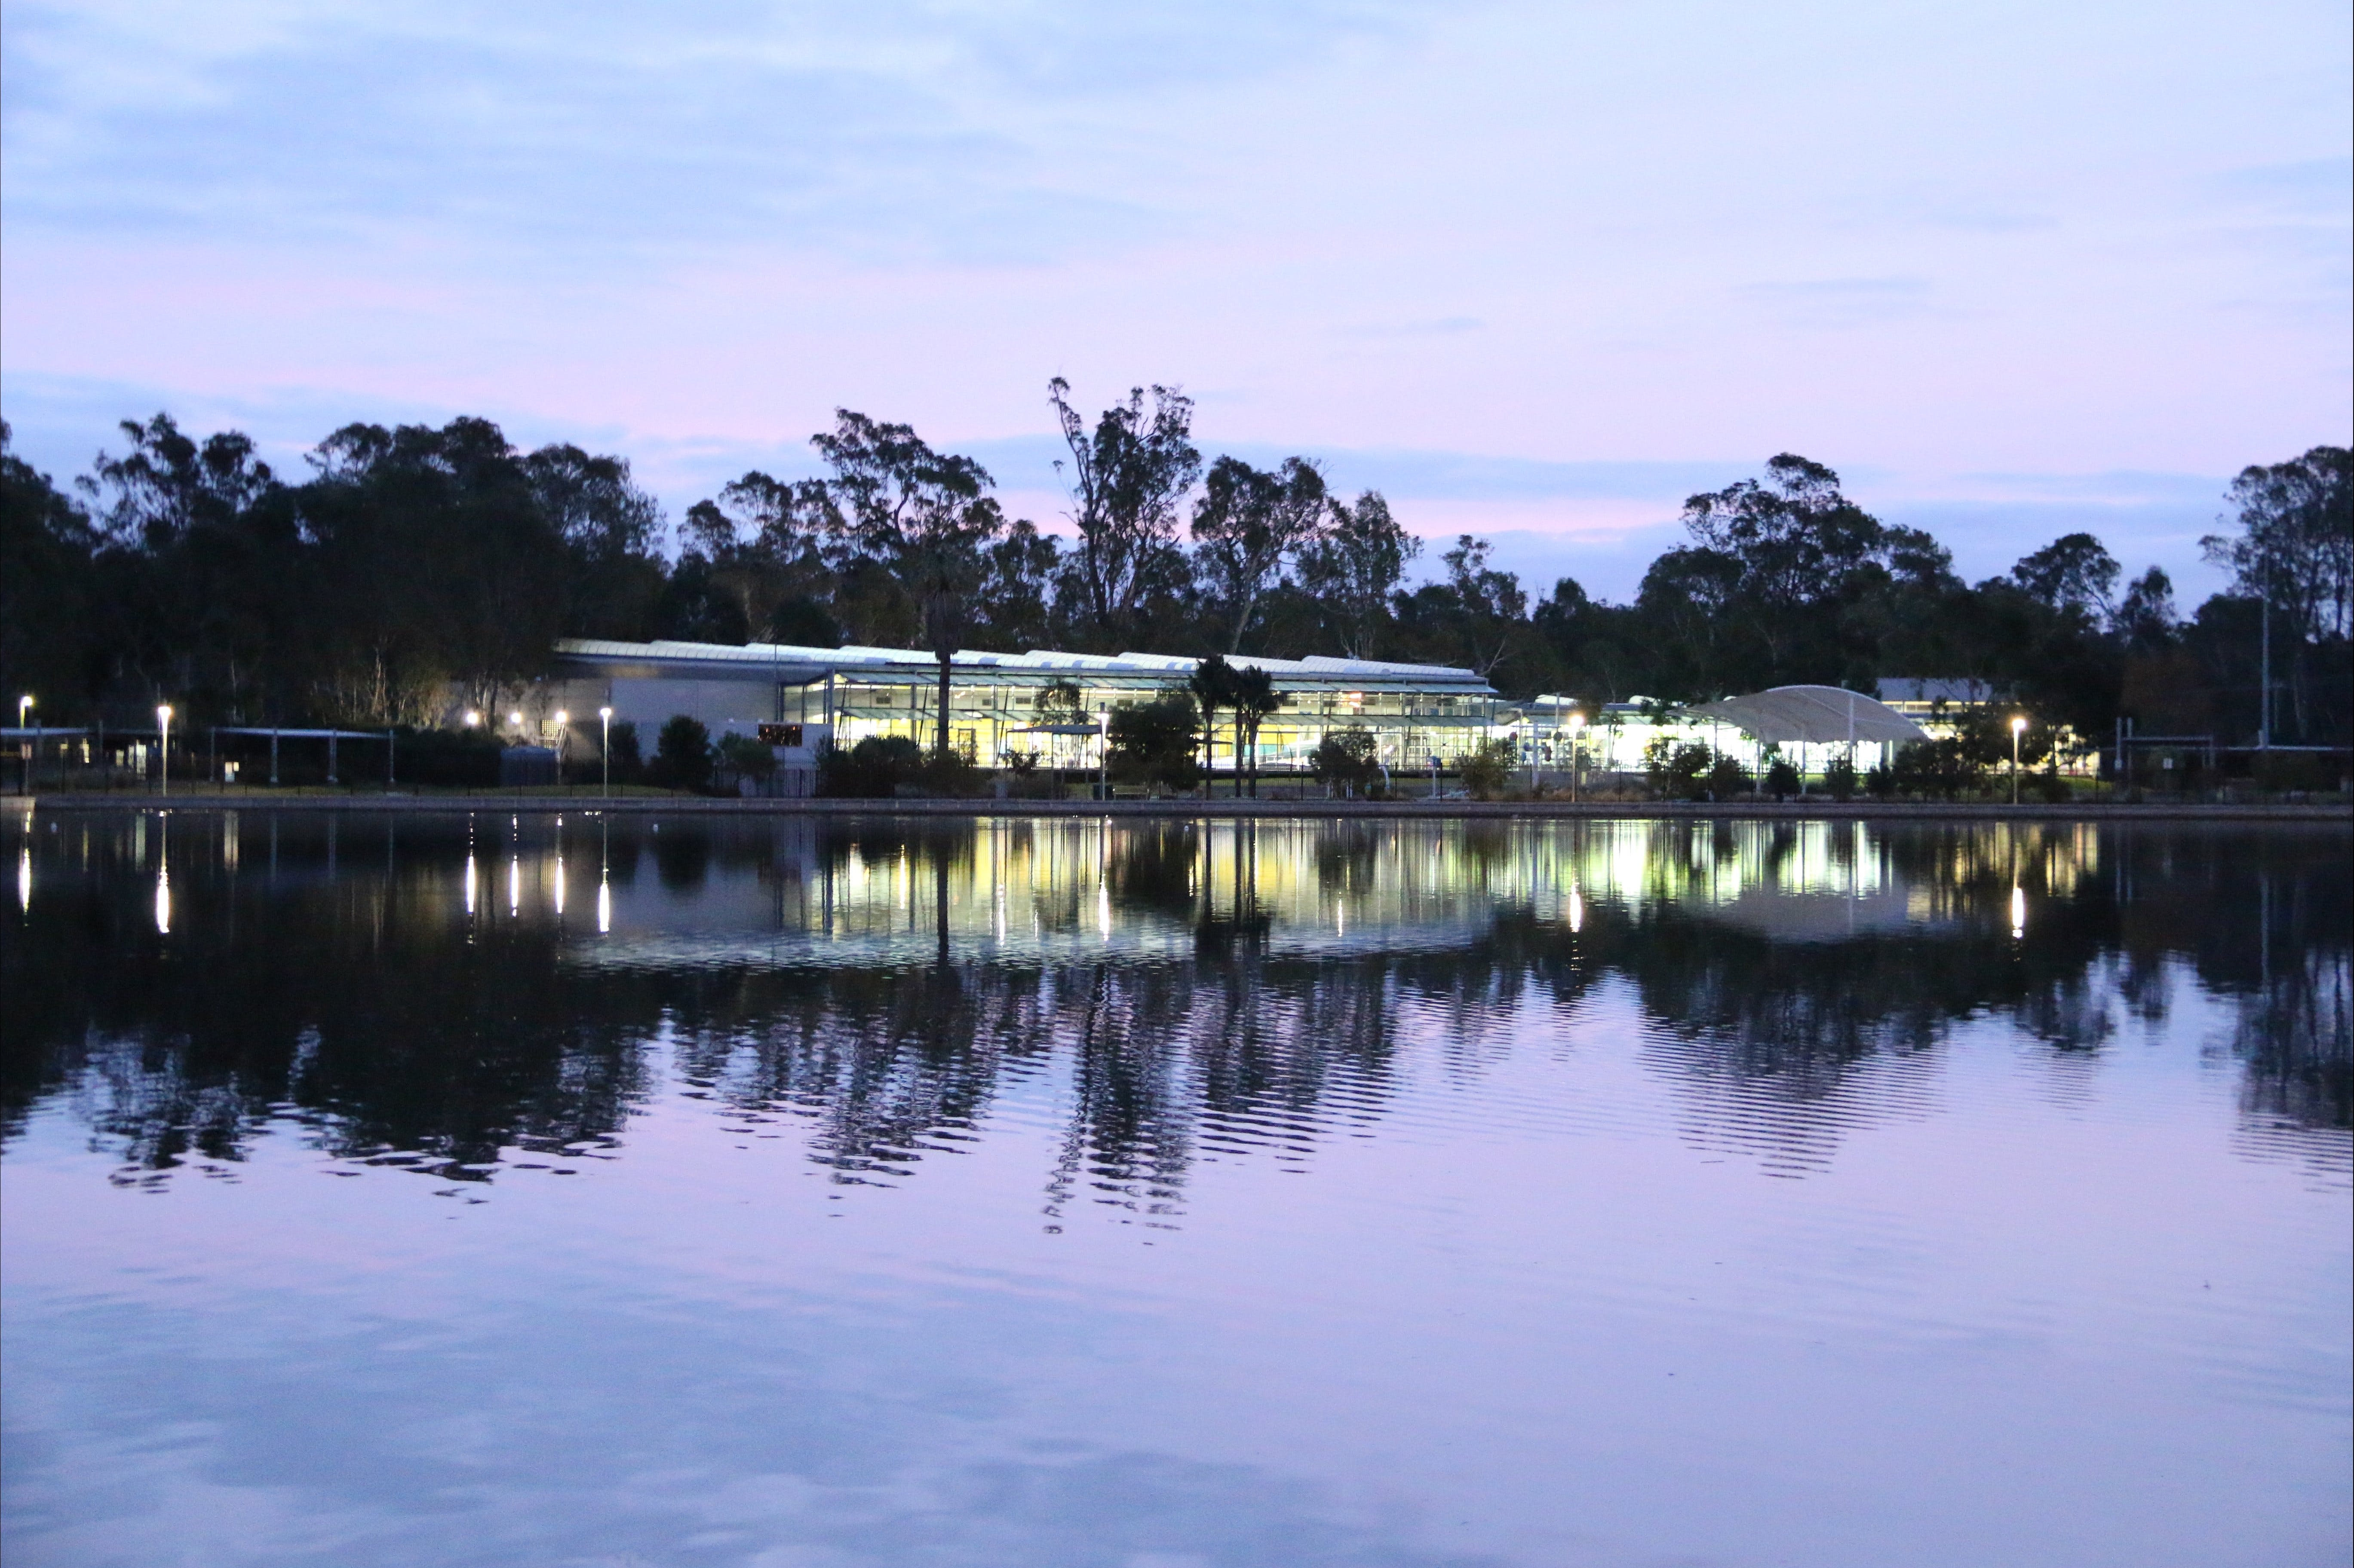 Aquamoves Lakeside Shepparton - Find Attractions